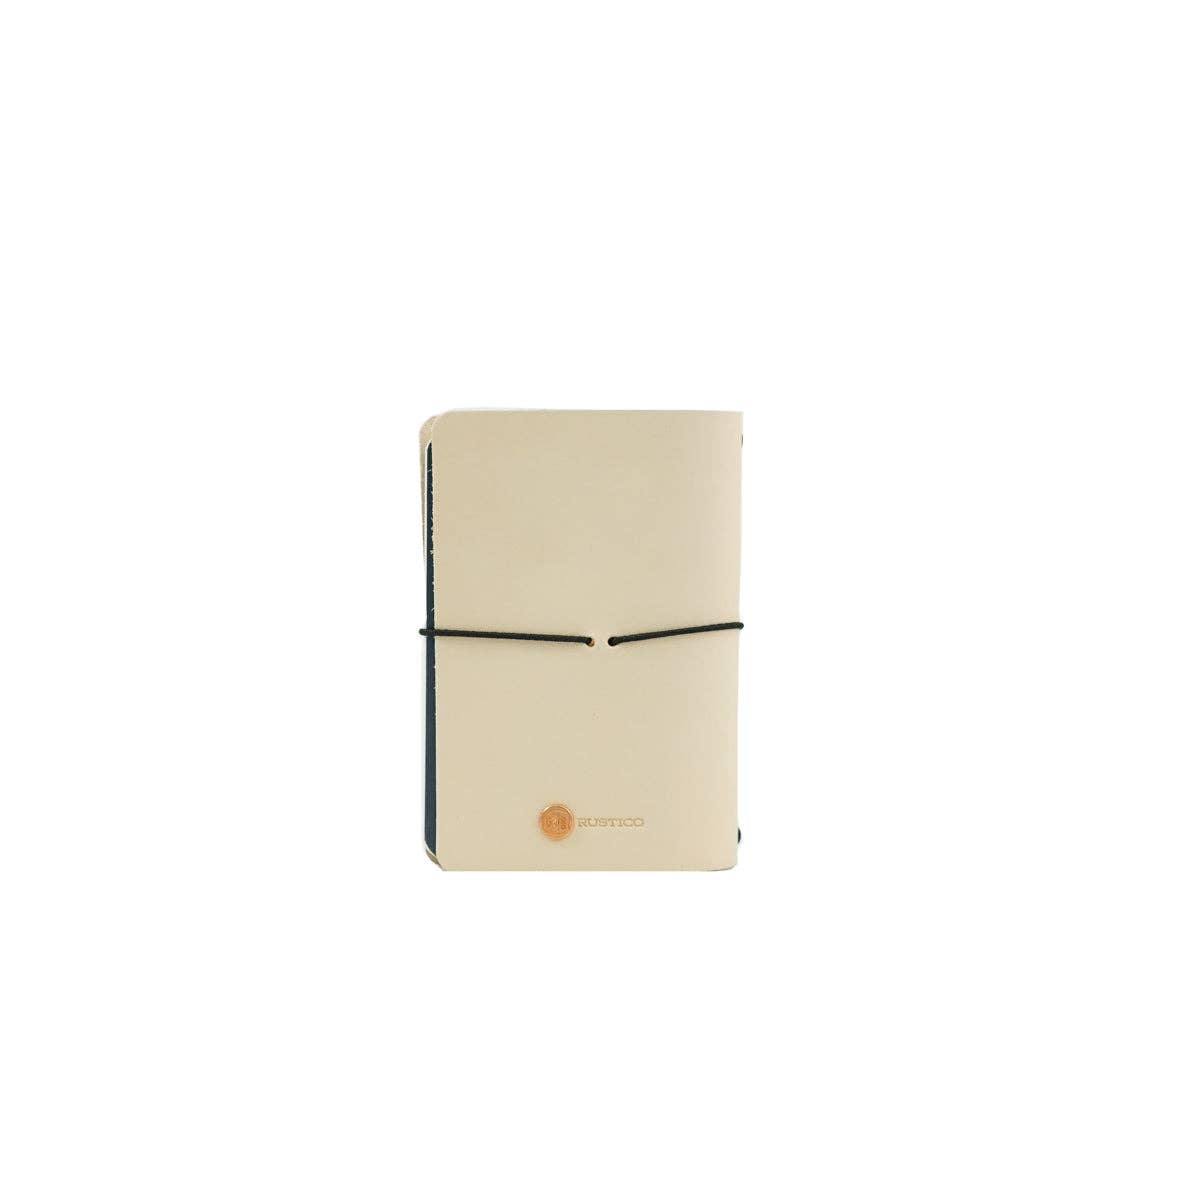 Expedition Leather Notebook - Medium